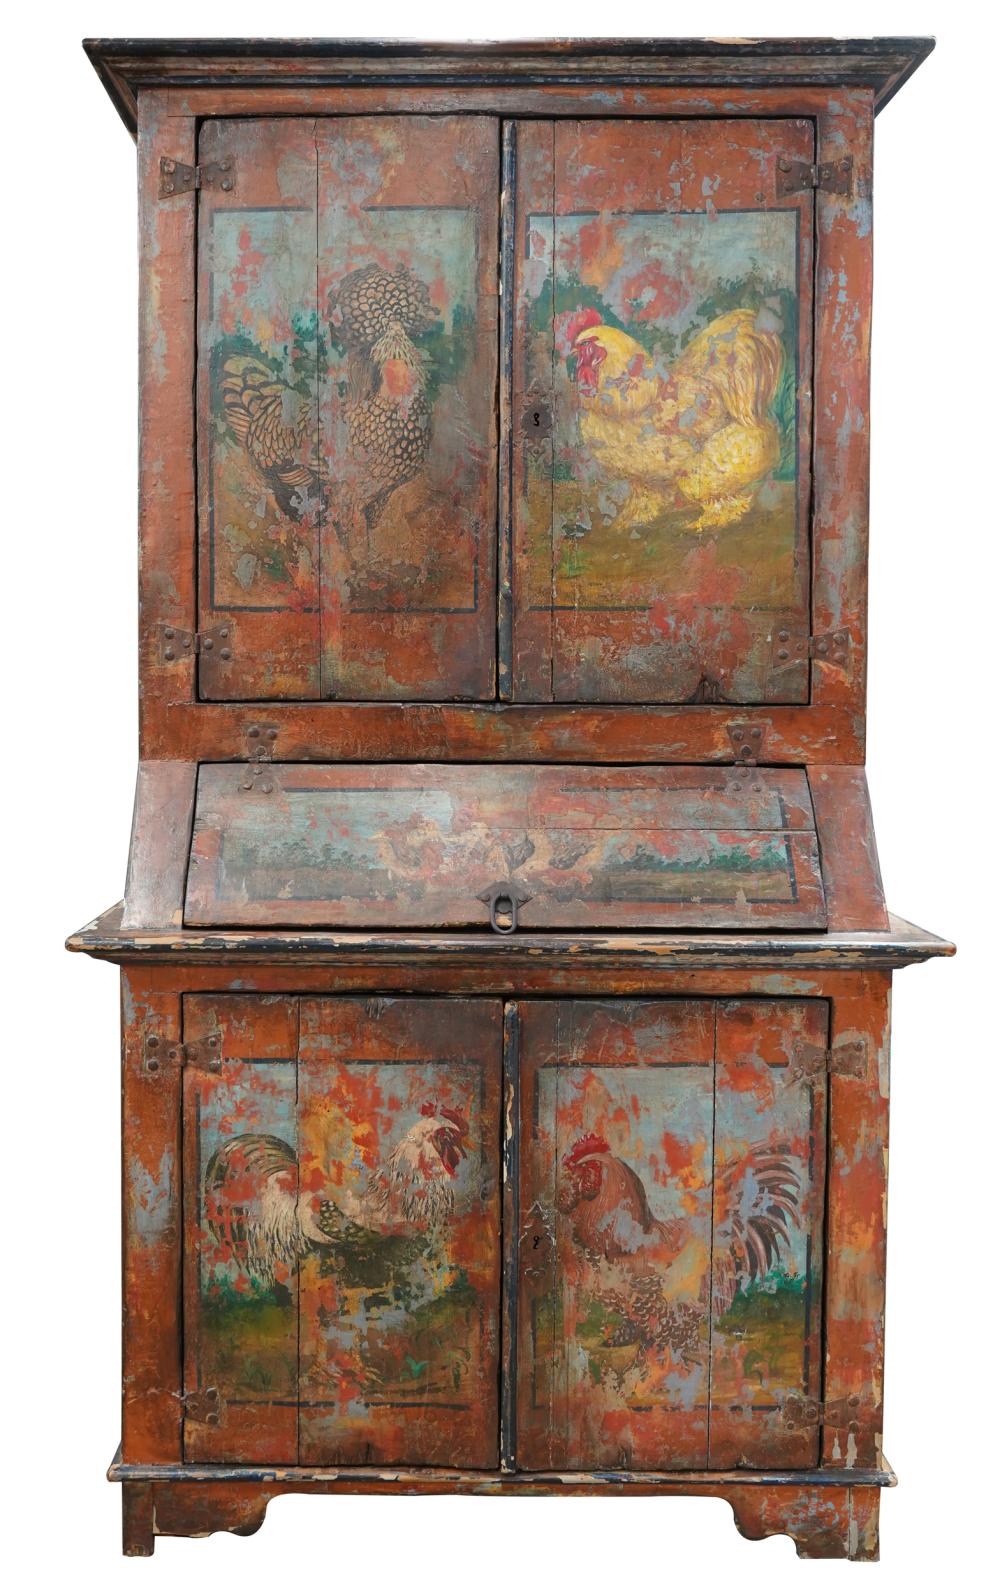 ANTIQUE RUSTIC PAINTED WOOD CABINETin